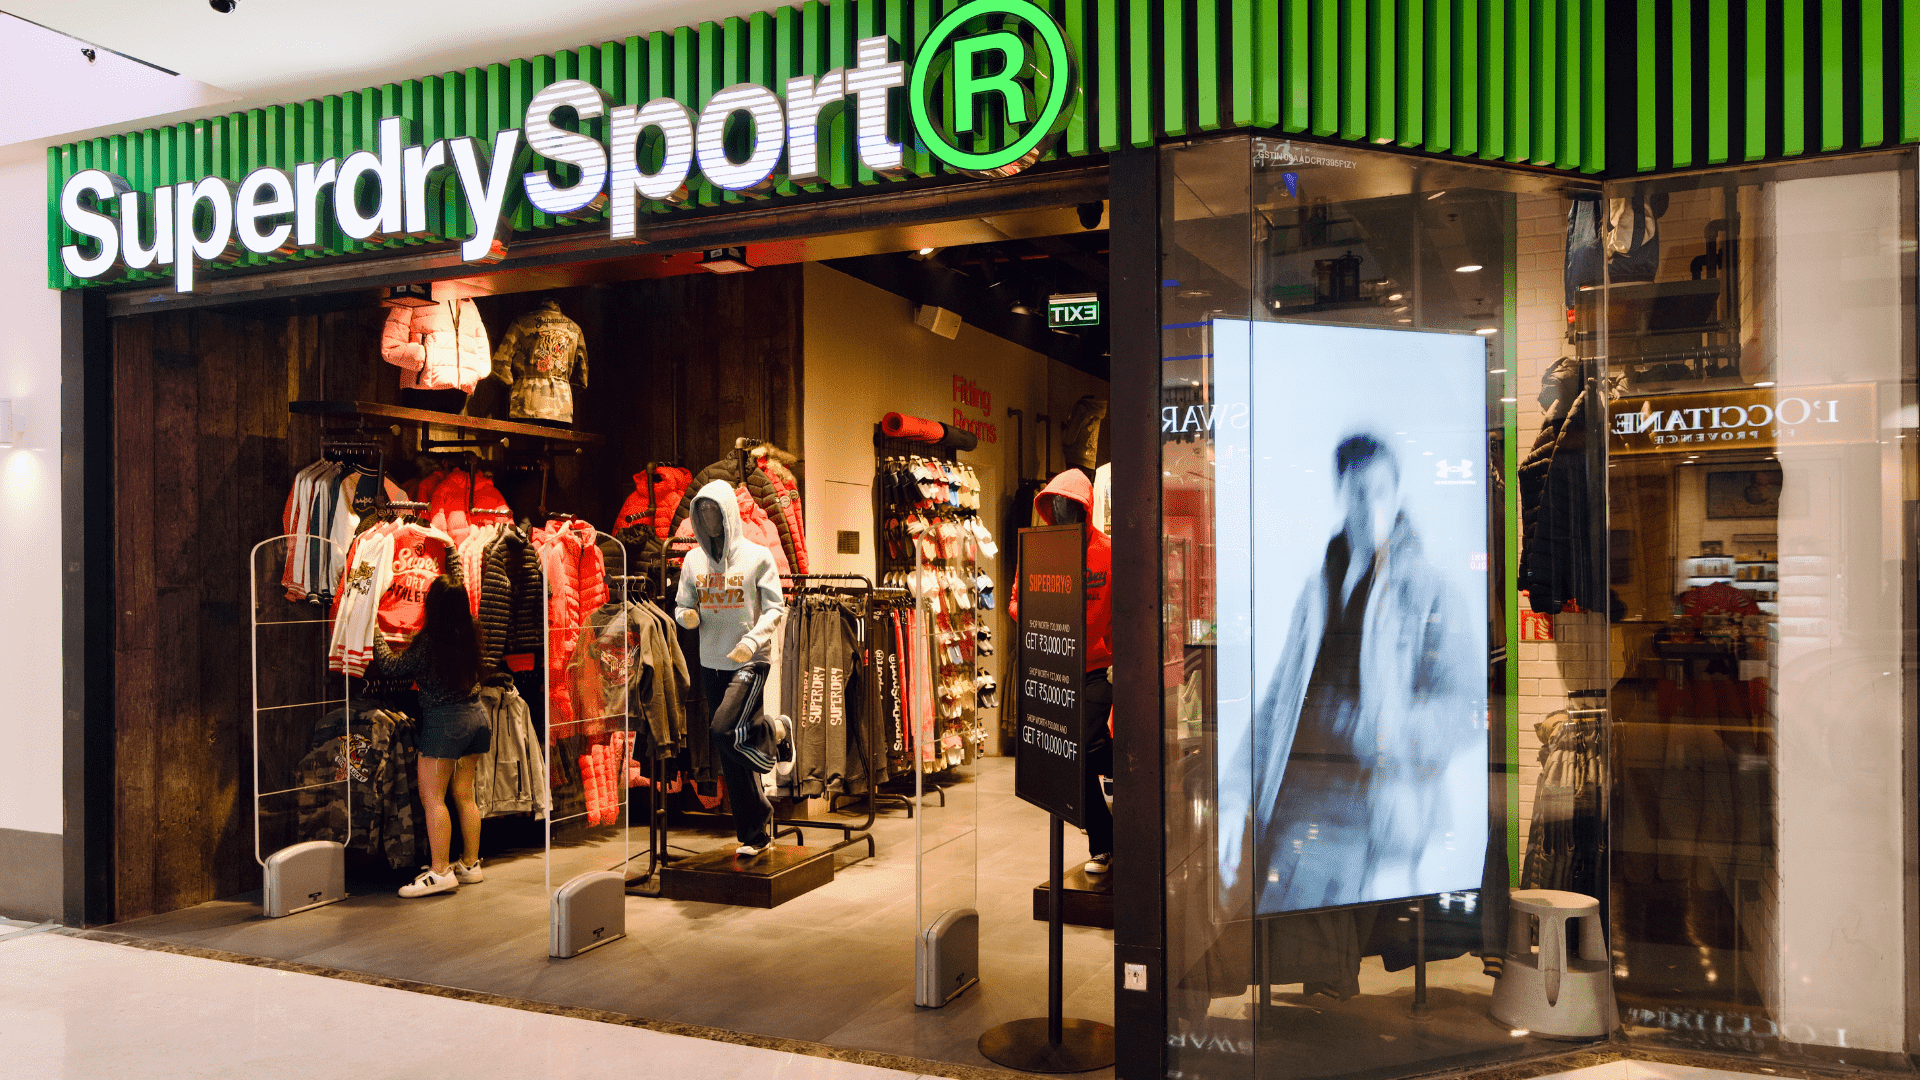 https://www.dlfmallofindia.com/Assets/stores/superdry-sport.png